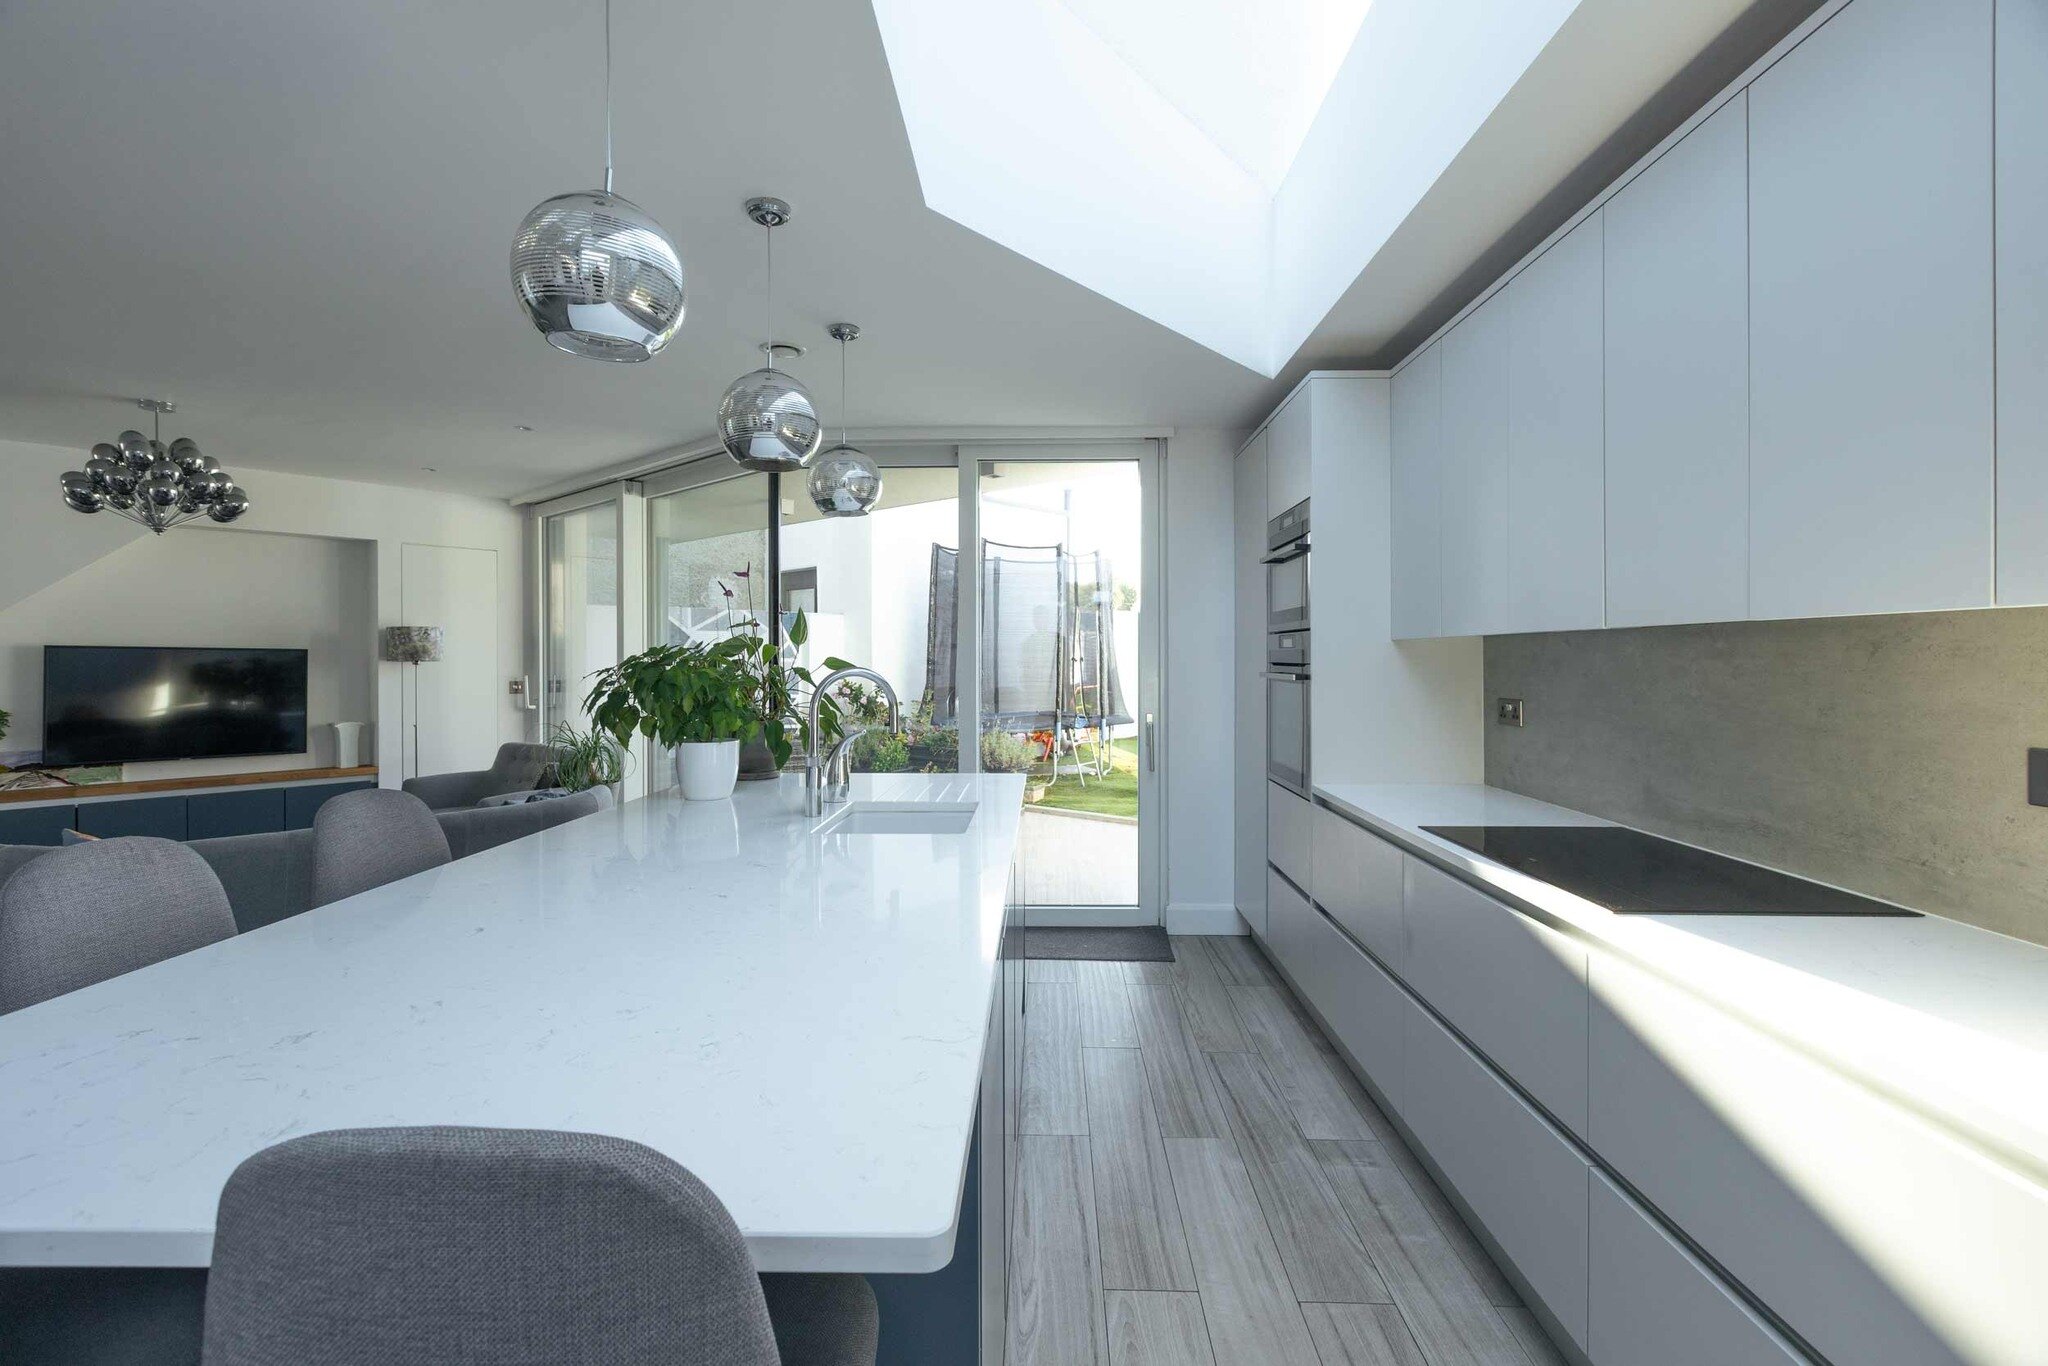 To create a brighter space for our client, we used a large skylight above the kitchen in this open-plan living area. 

The result? An abundance of natural light flooding the space, creating a brighter and more welcoming atmosphere ✨
.
.
.
#architect 